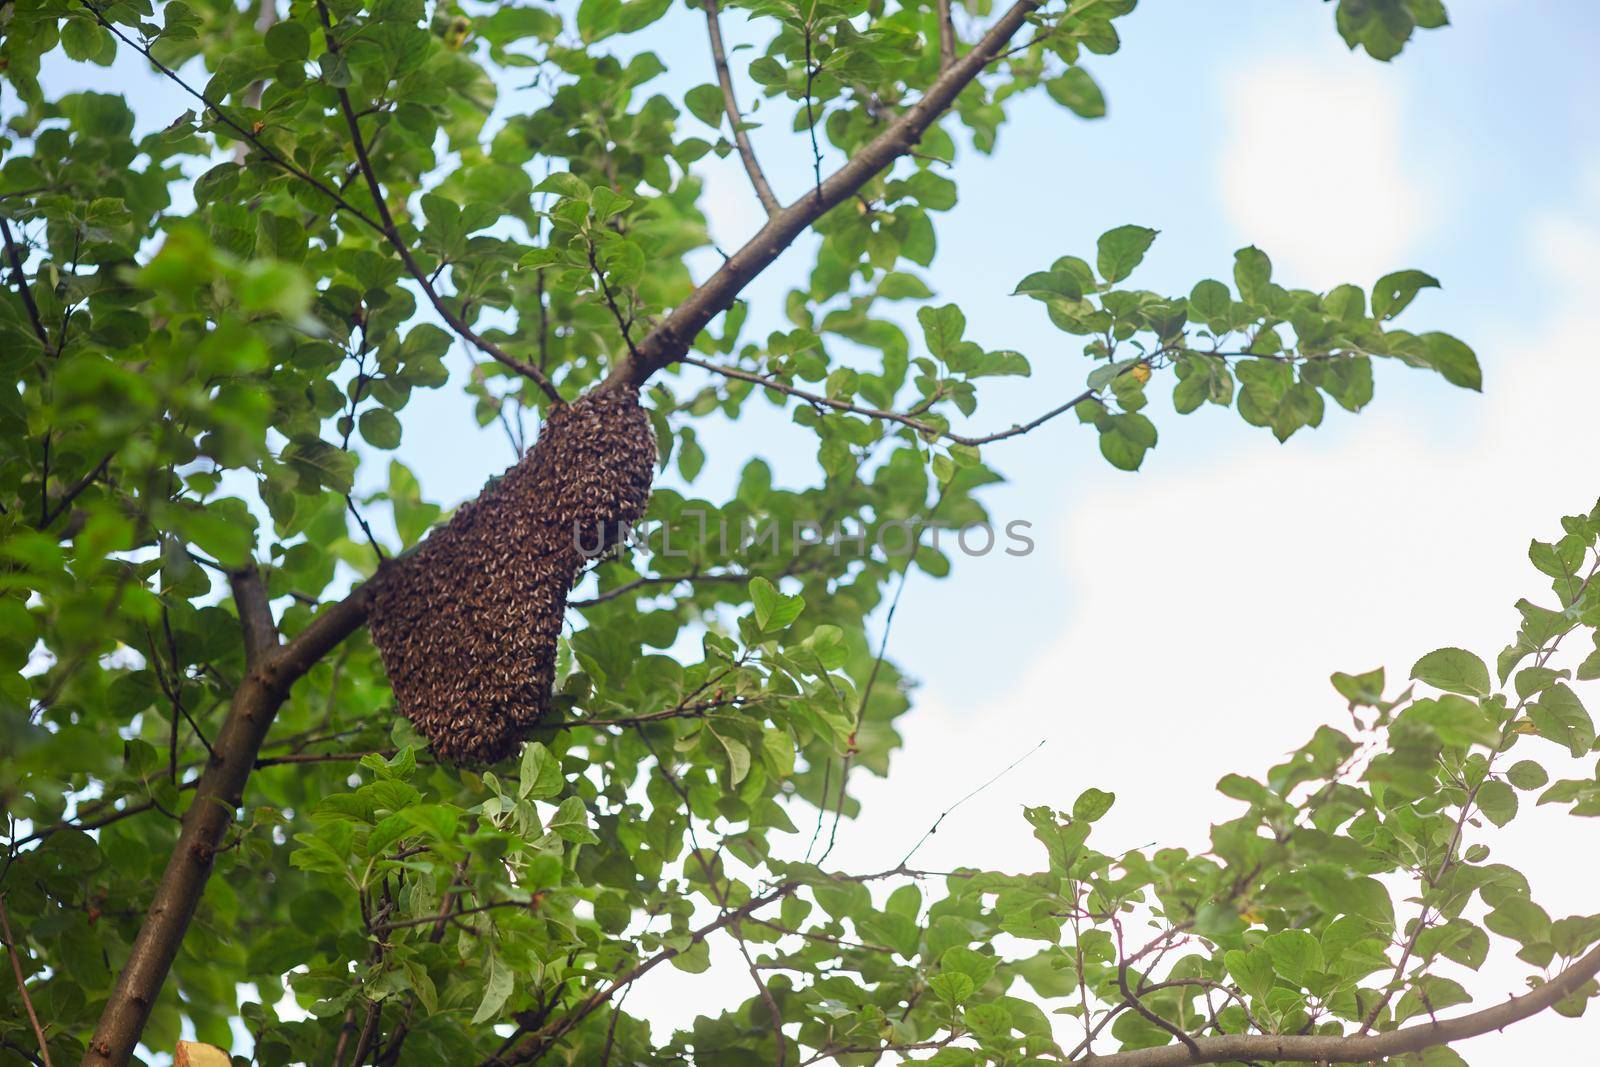 From below view of swarm of honeybees creating big beehive on tree branch in sunny summer day. Insects flying around honeycomb in garden, polluting flowers. Apriculture, beekeeping concept.